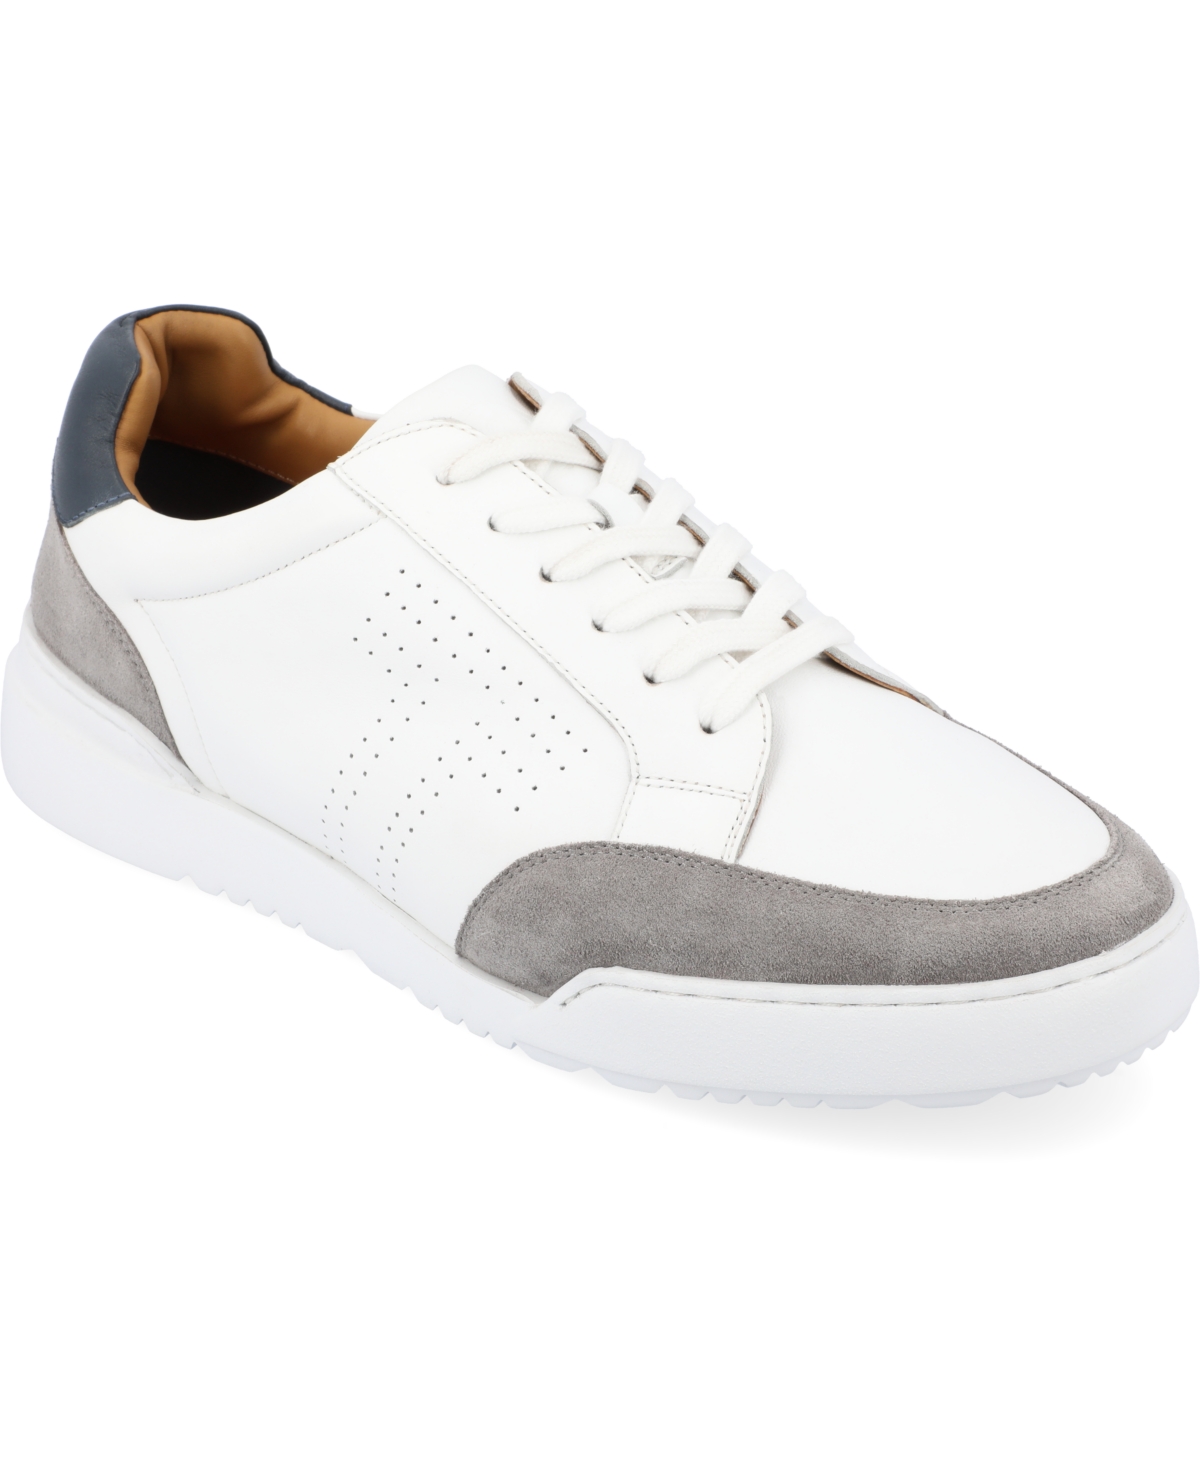 Men's Roderick Casual Leather Sneakers - Taupe